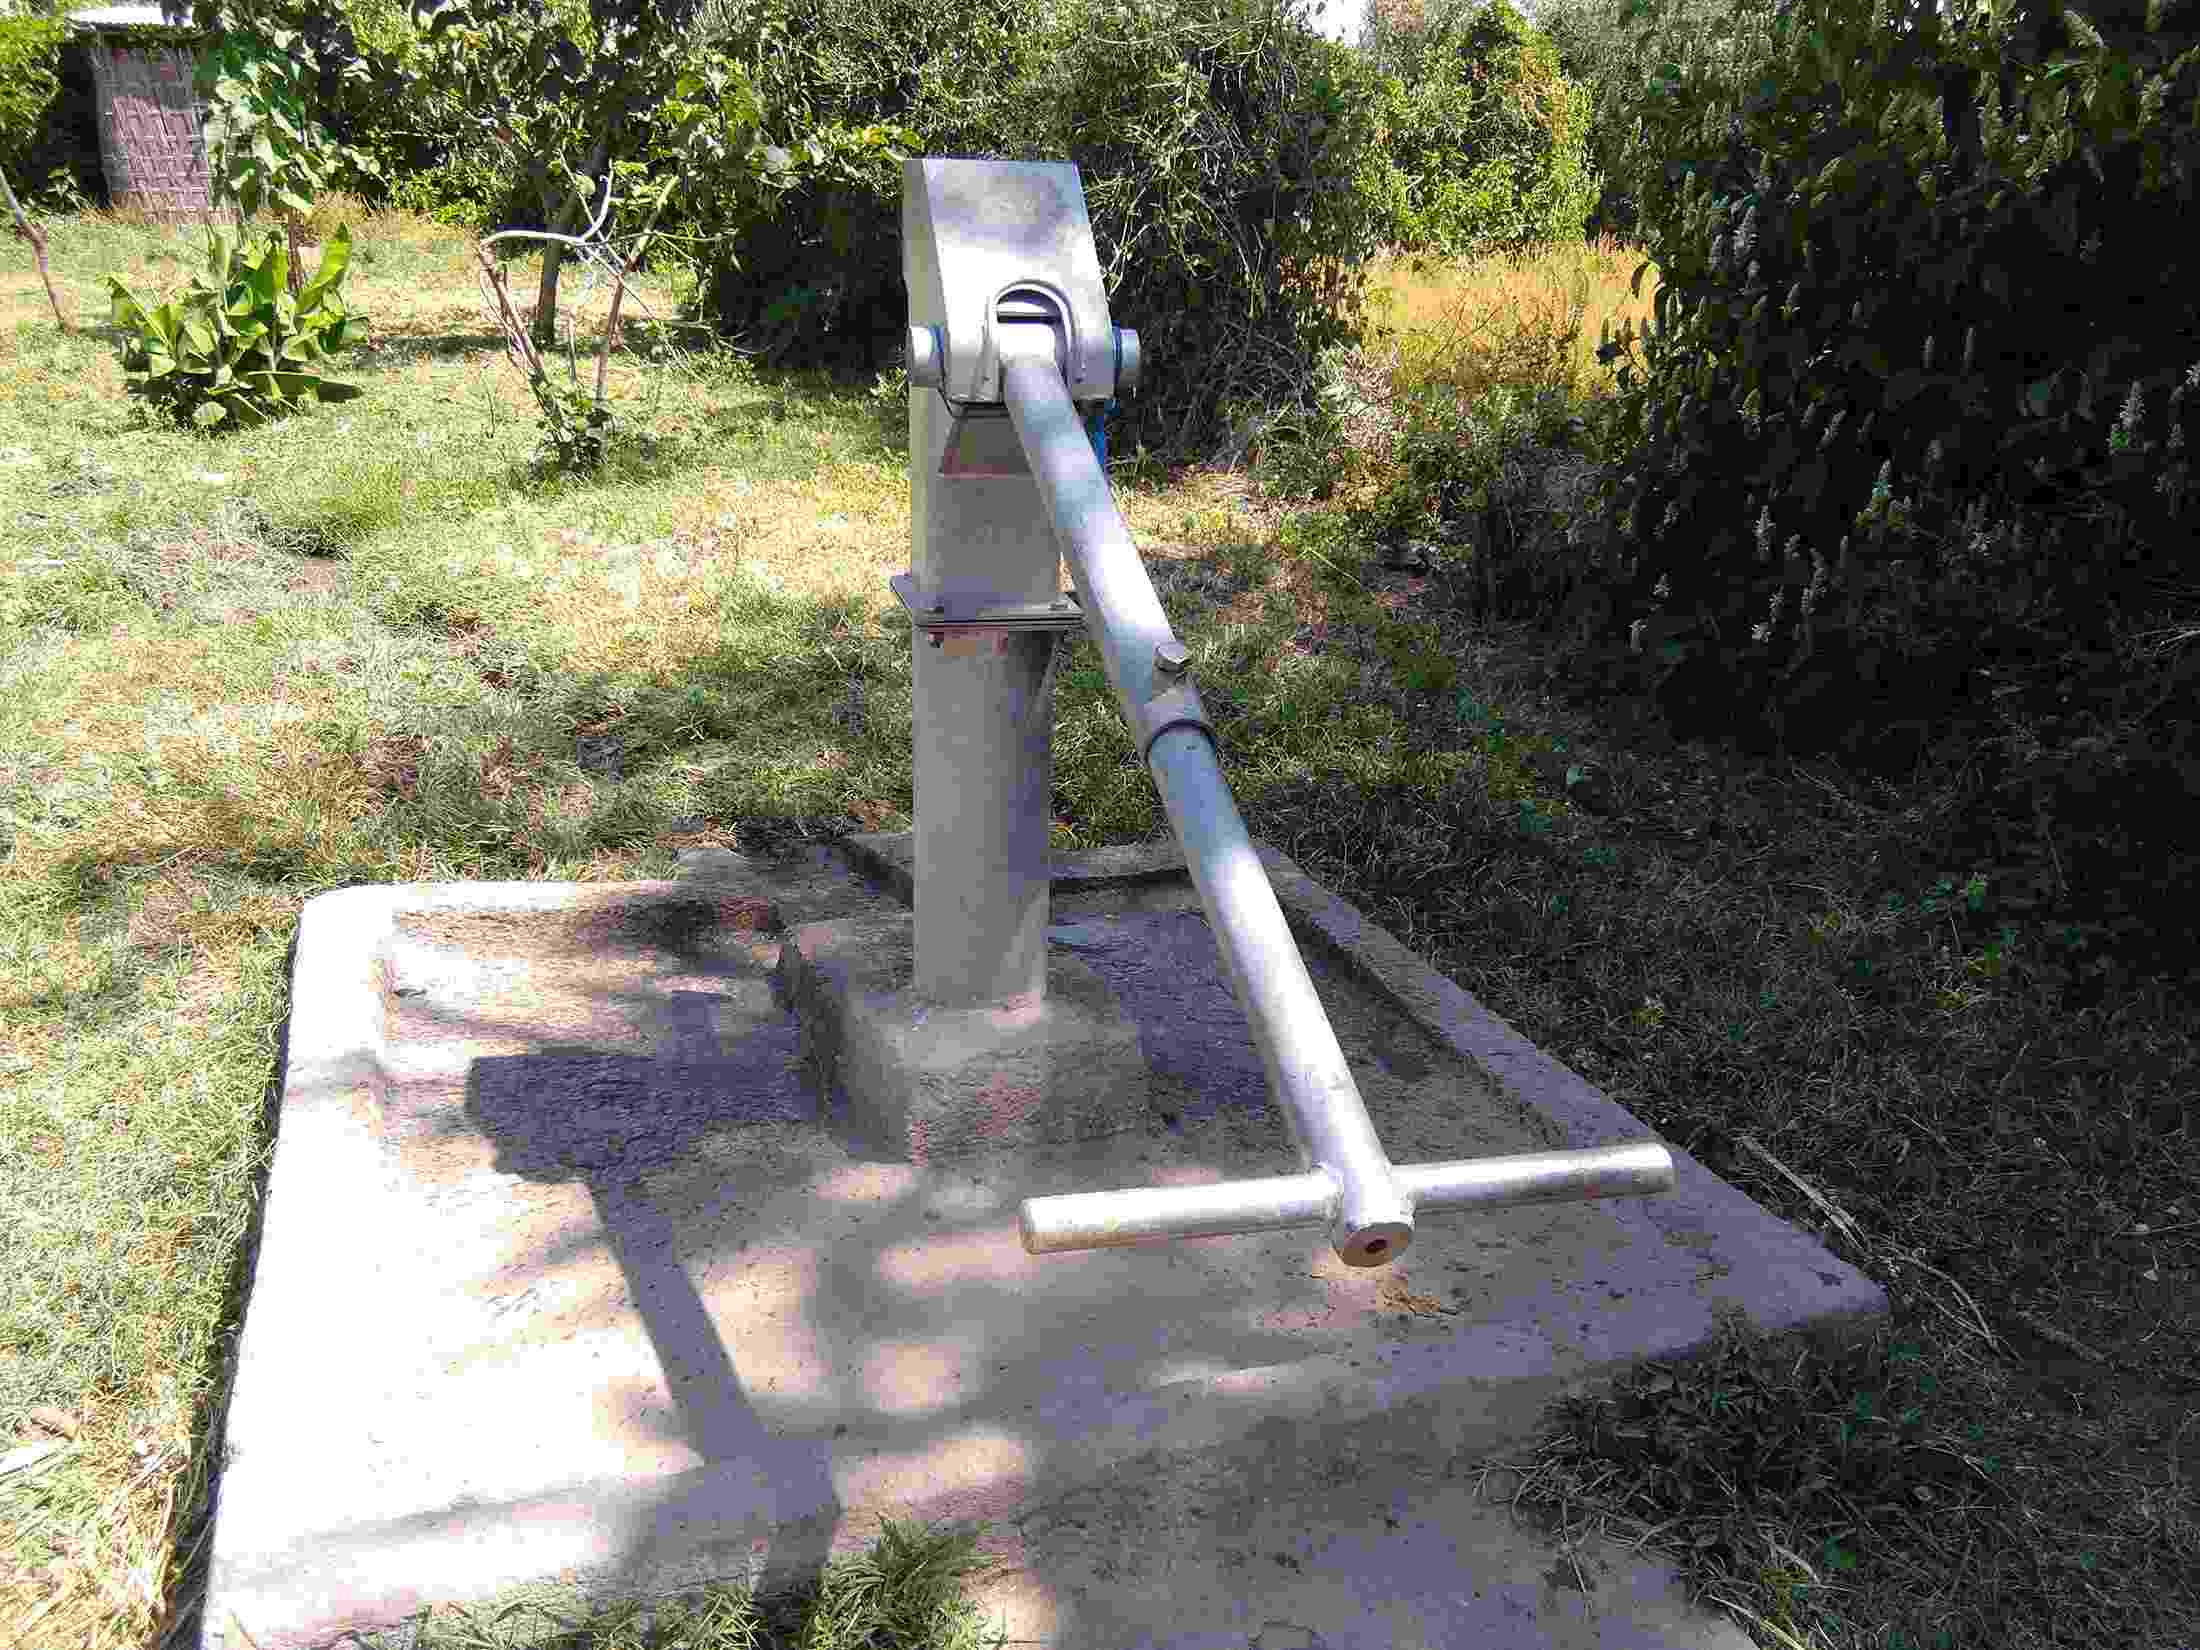 A metal water hand pump mounted on a concrete bed amongst greenery and shrubs